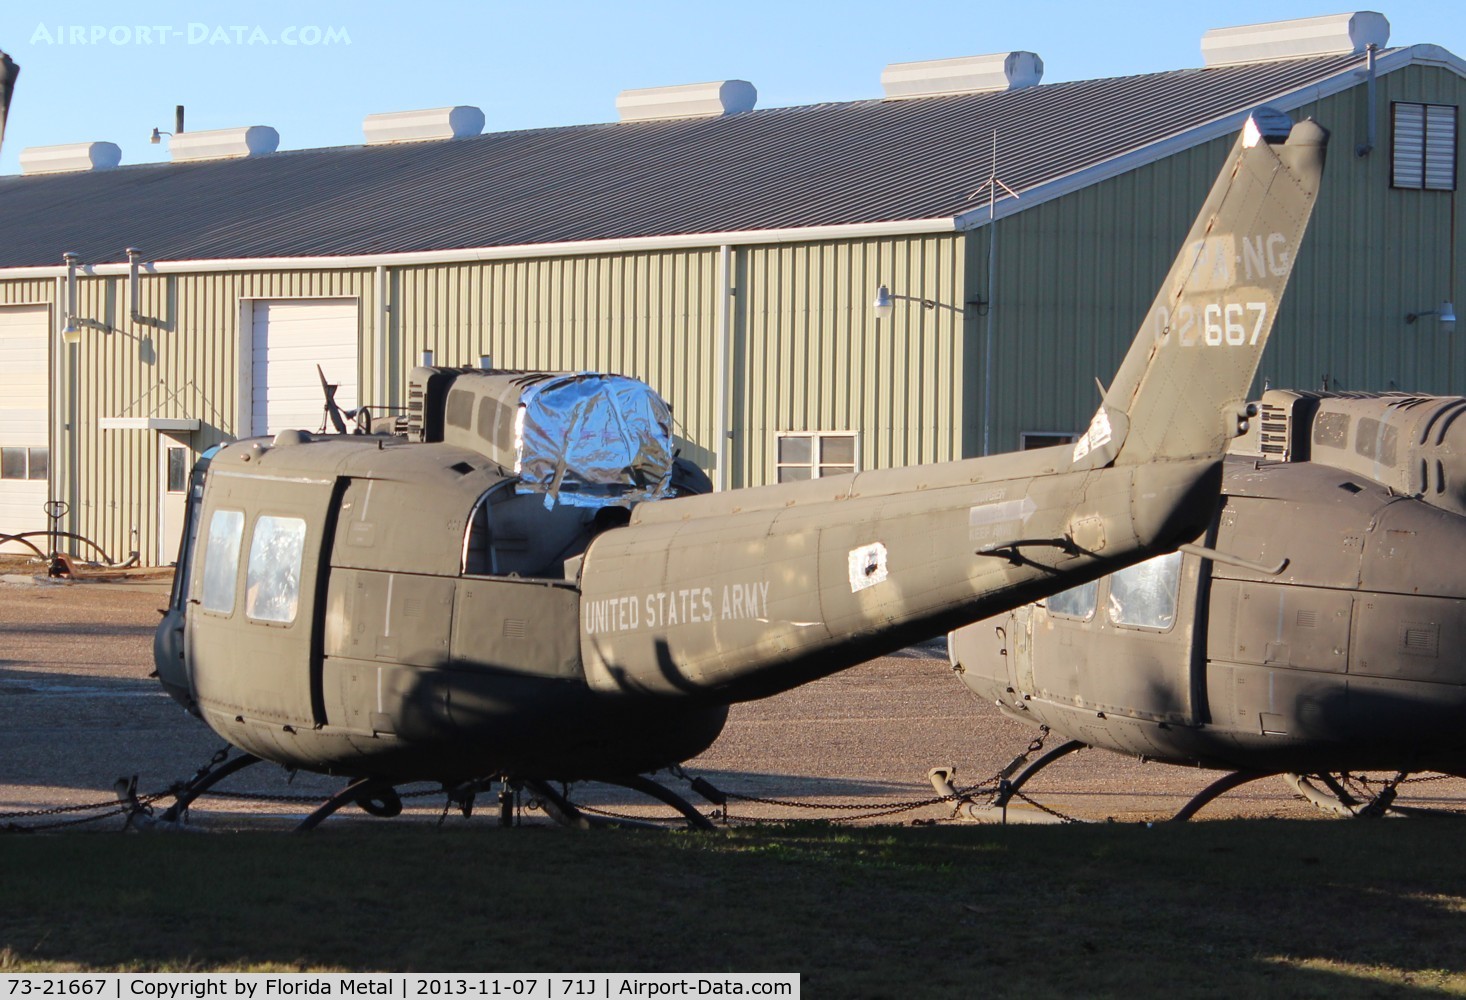 73-21667, 1973 Bell UH-1H Iroquois C/N 13355, UH-1 zx